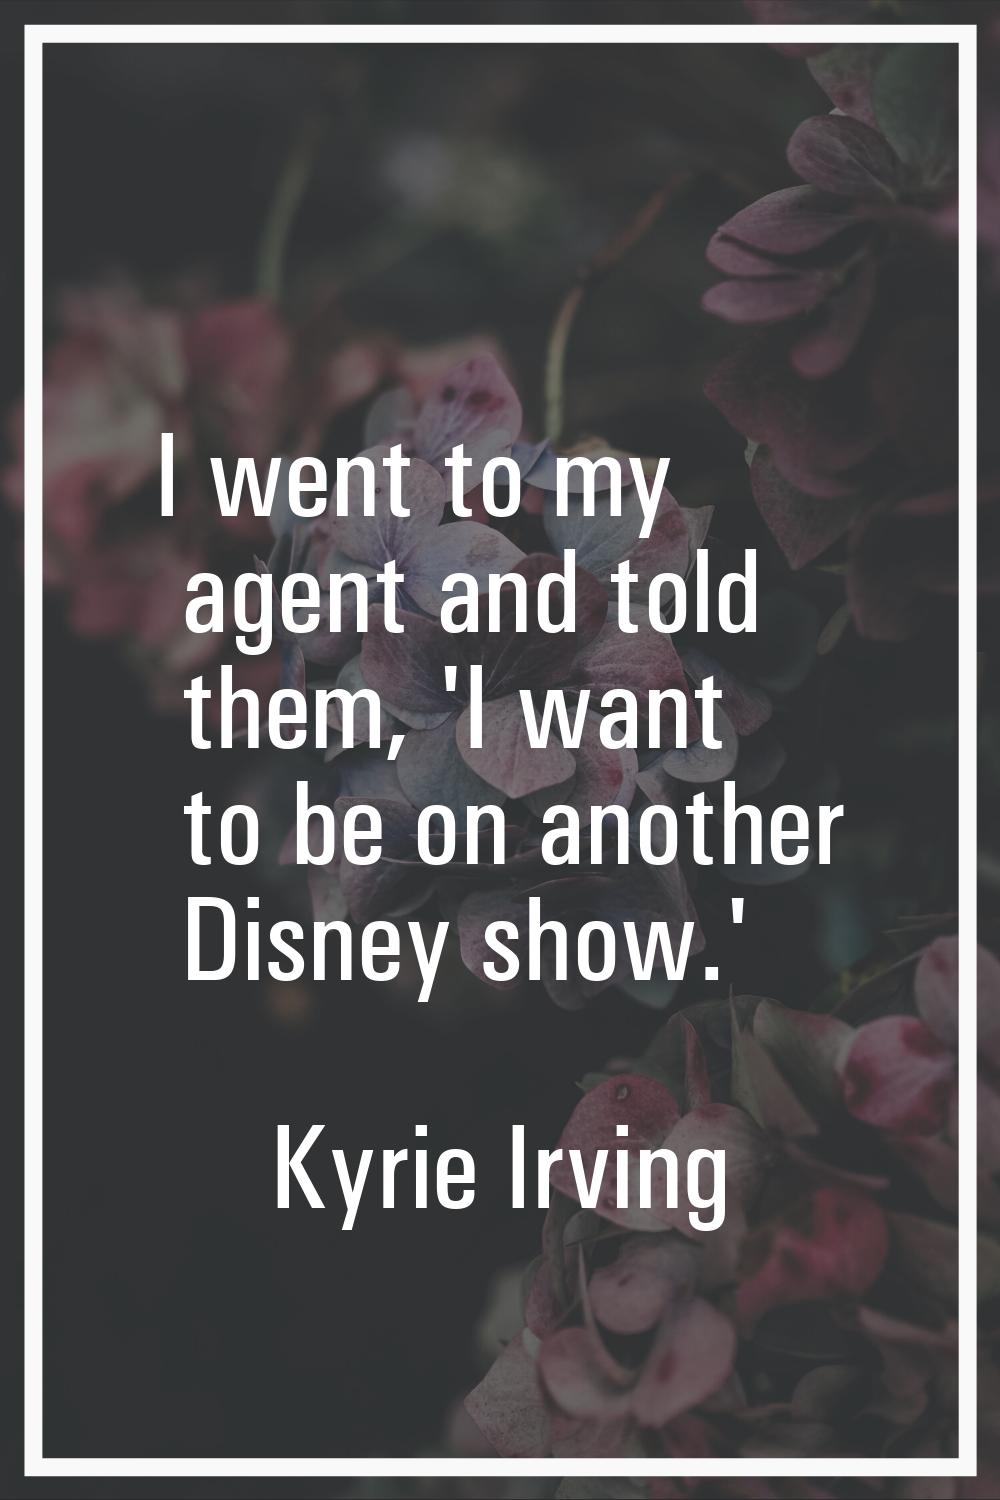 I went to my agent and told them, 'I want to be on another Disney show.'